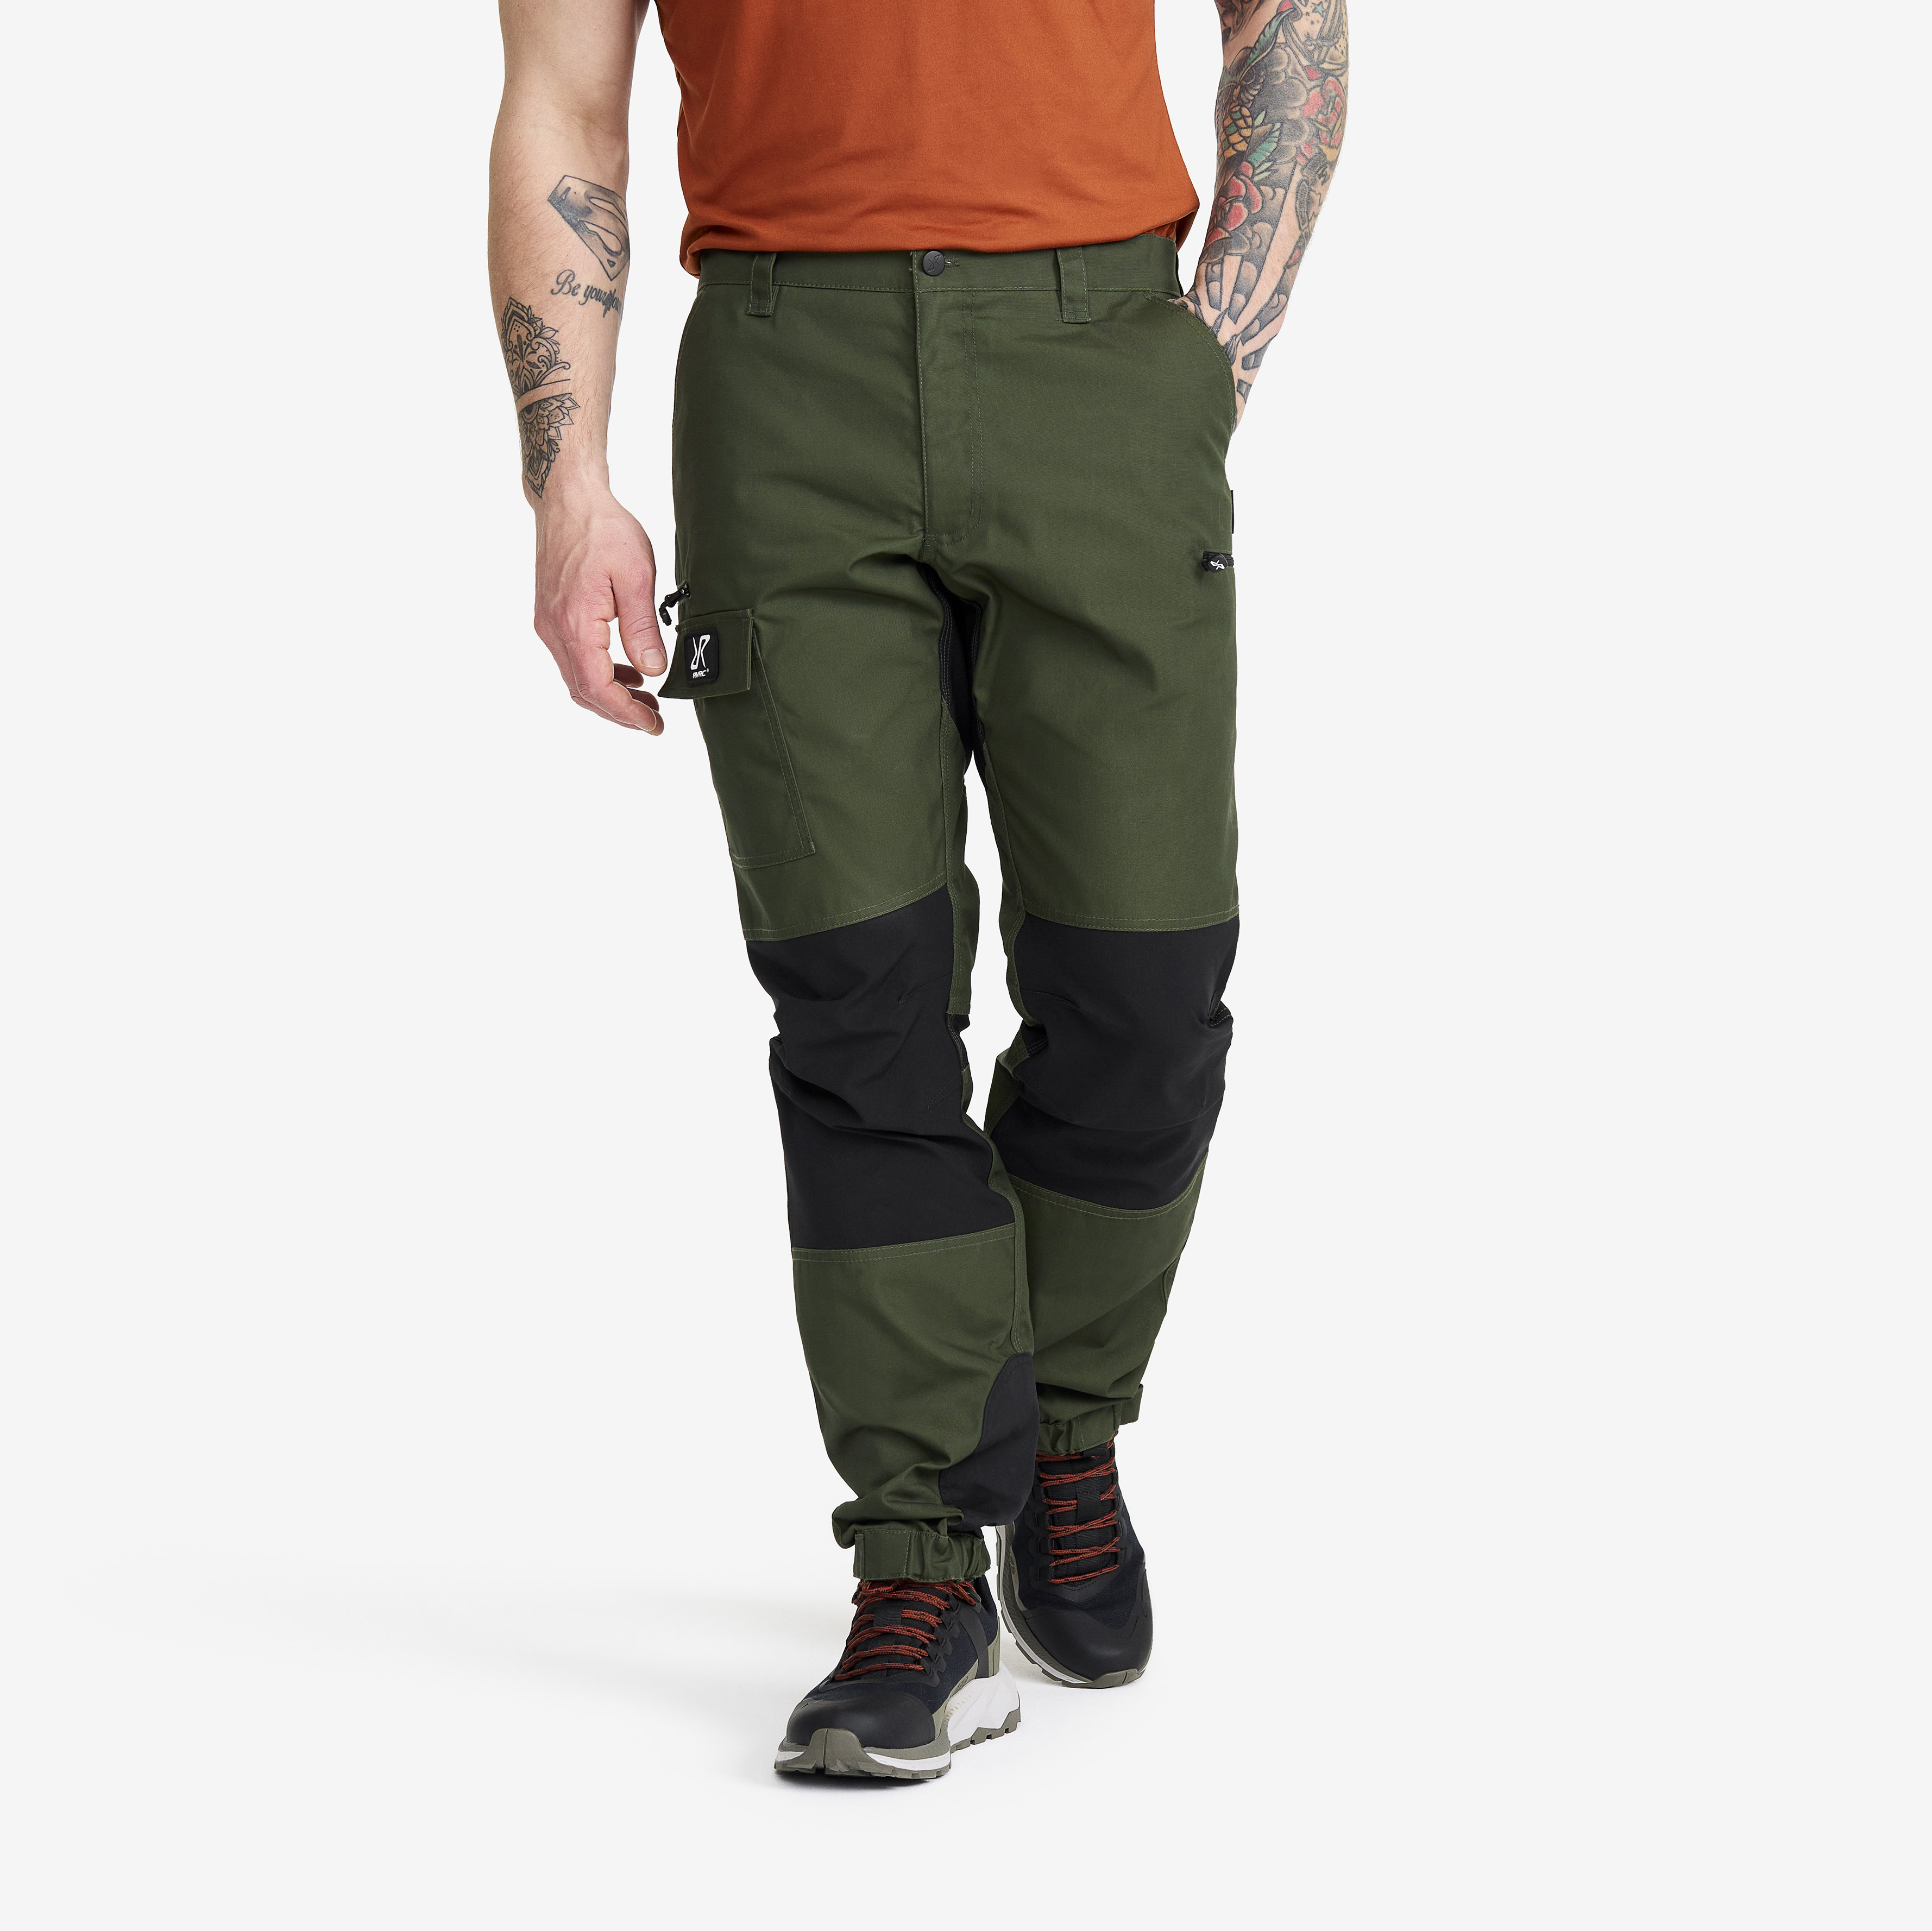 Nordwand walking trousers for men in green